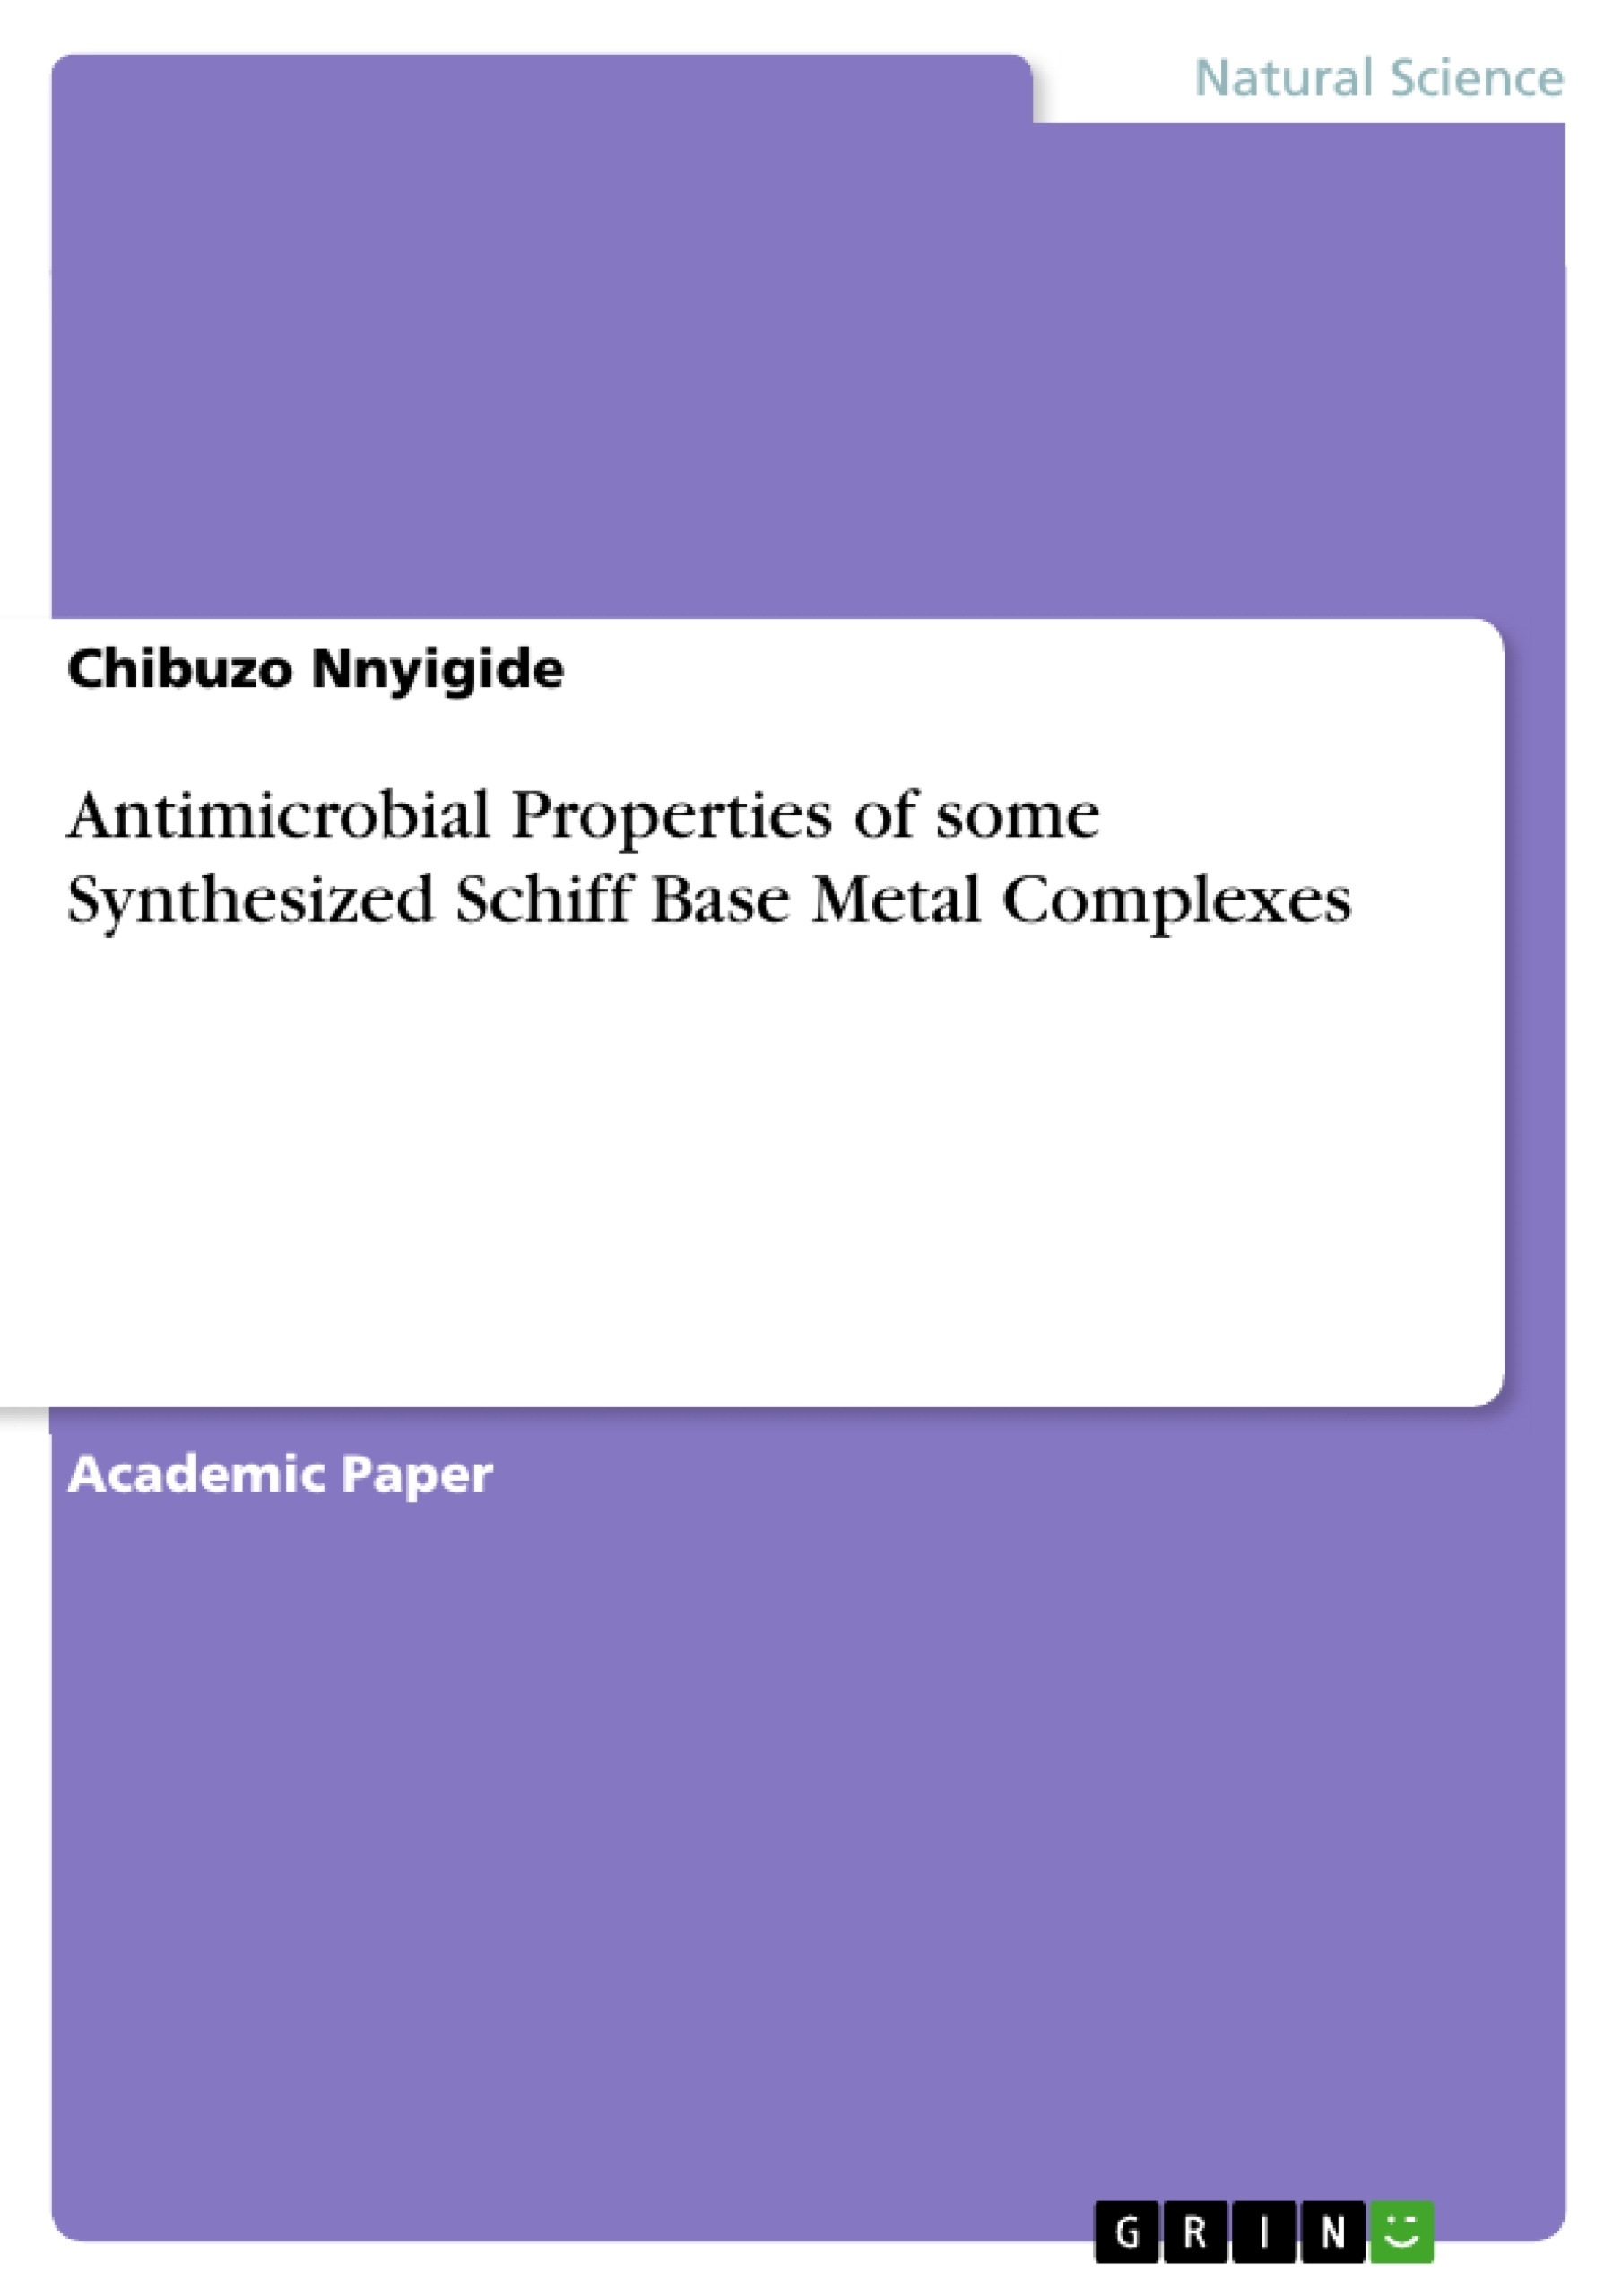 Titre: Antimicrobial Properties of some Synthesized Schiff Base Metal Complexes